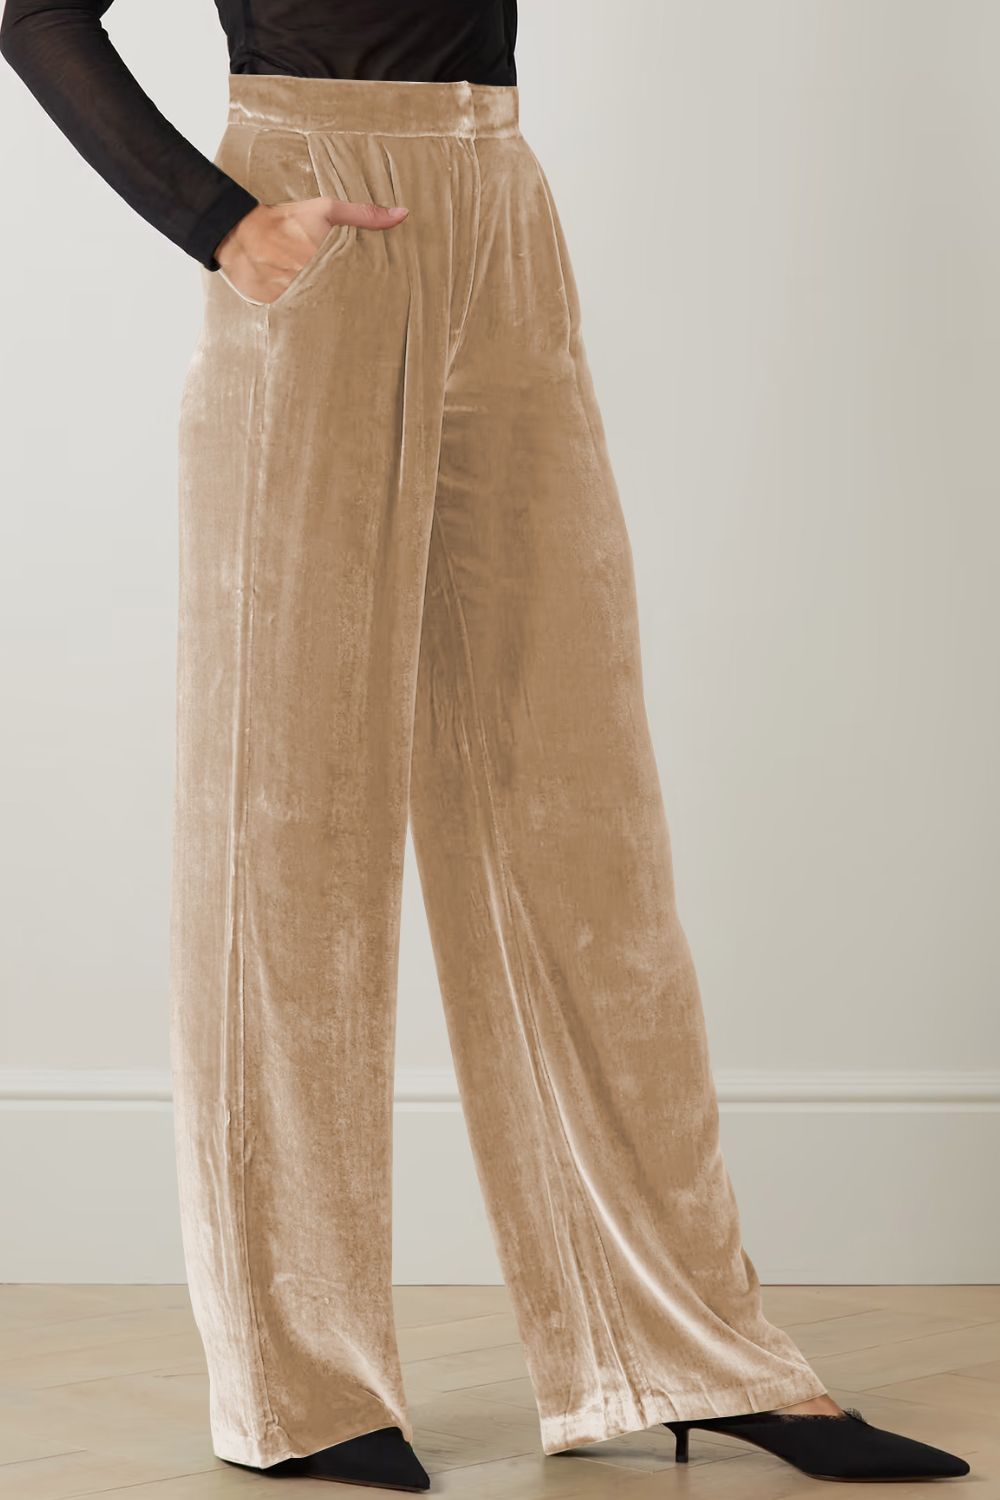 Double Take Loose Fit High Waist Long Pants with Pockets - AllIn Computer